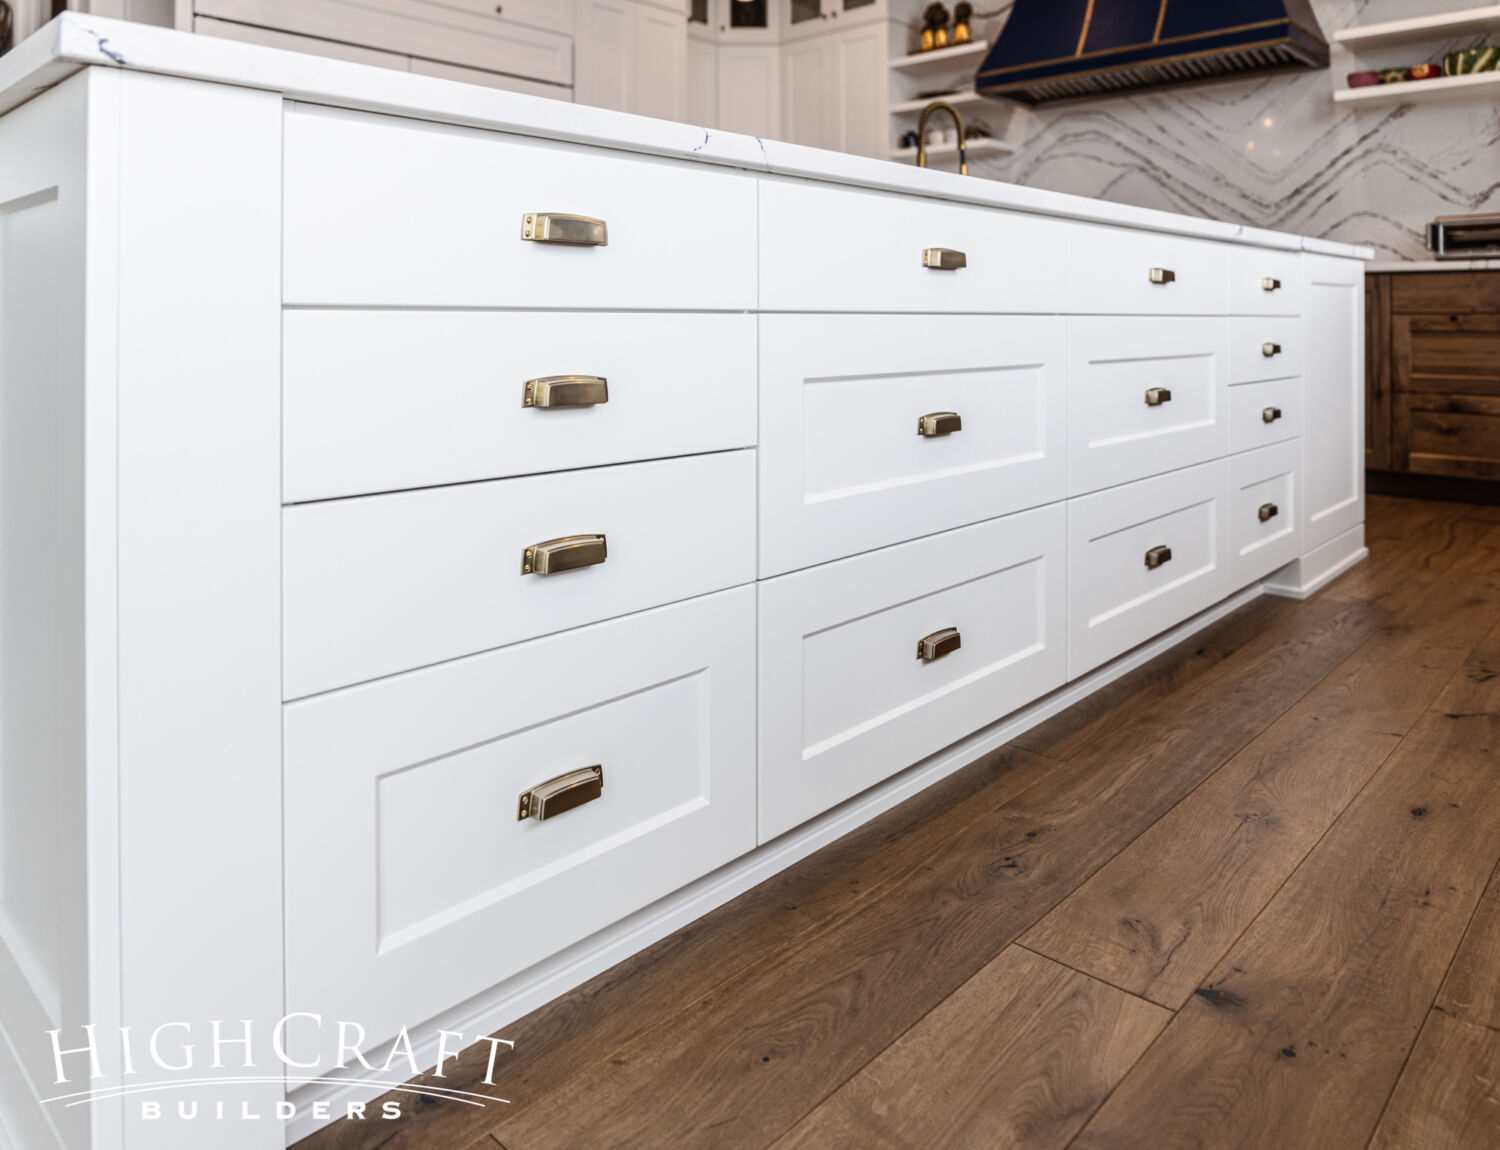 Second-Story-Pop-Top-White-Painted-Kitchen-Island-Drawers